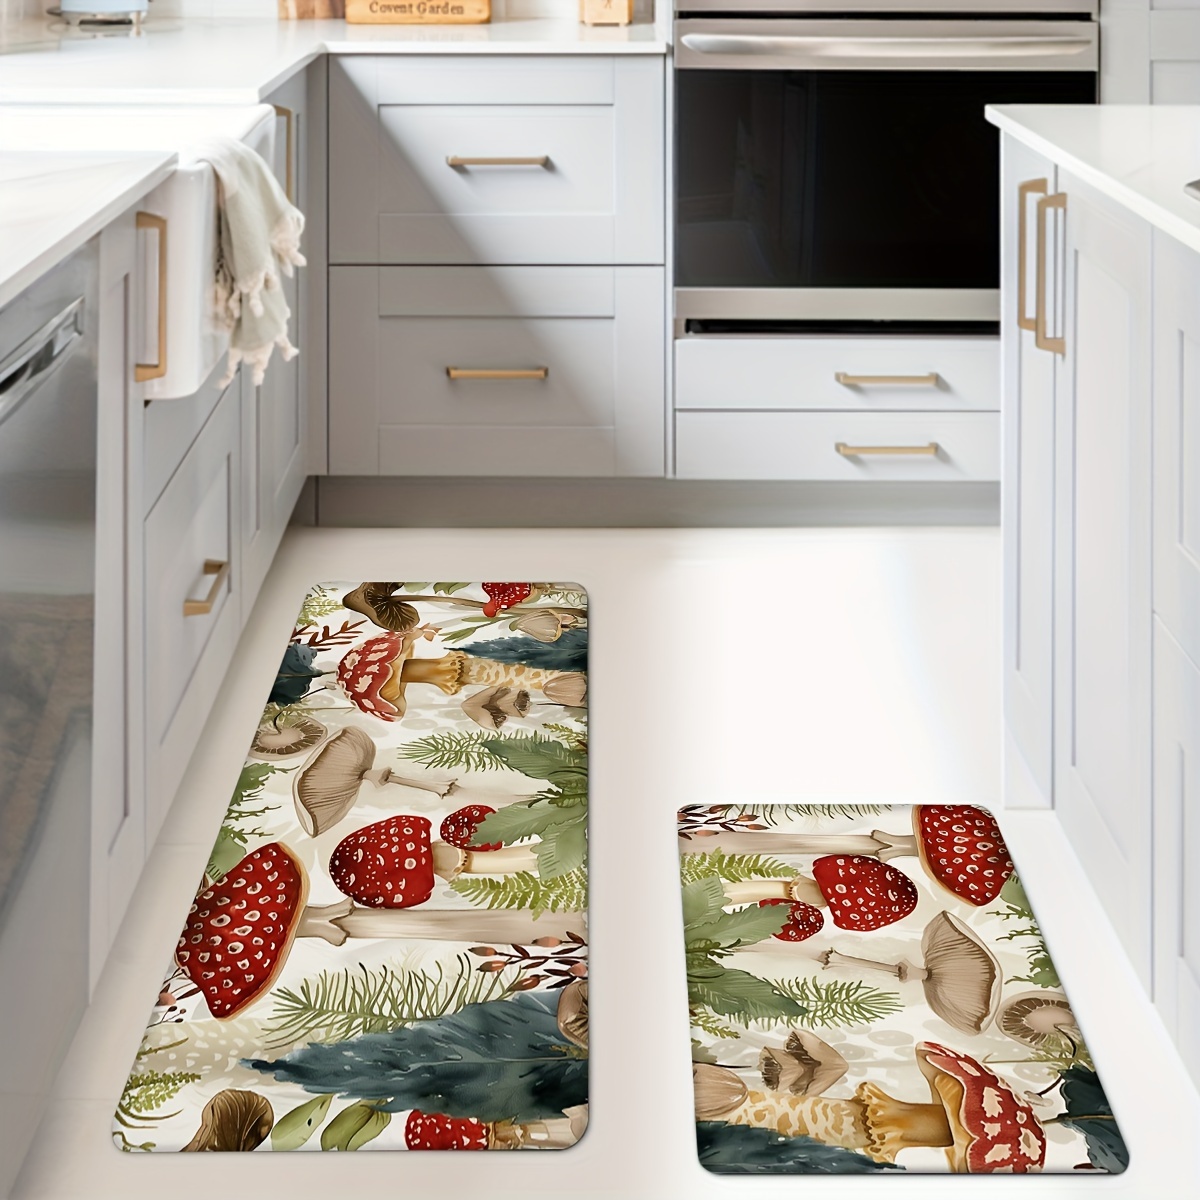 

1/2pcs, Area Rug, Mushroom Kitchen Mats, Non-slip And Durable Bathroom Pads For Floor, Comfortable Standing Runner Rugs, Carpets For Kitchen, Home, Office, Laundry Room, Bathroom, Spring Decor